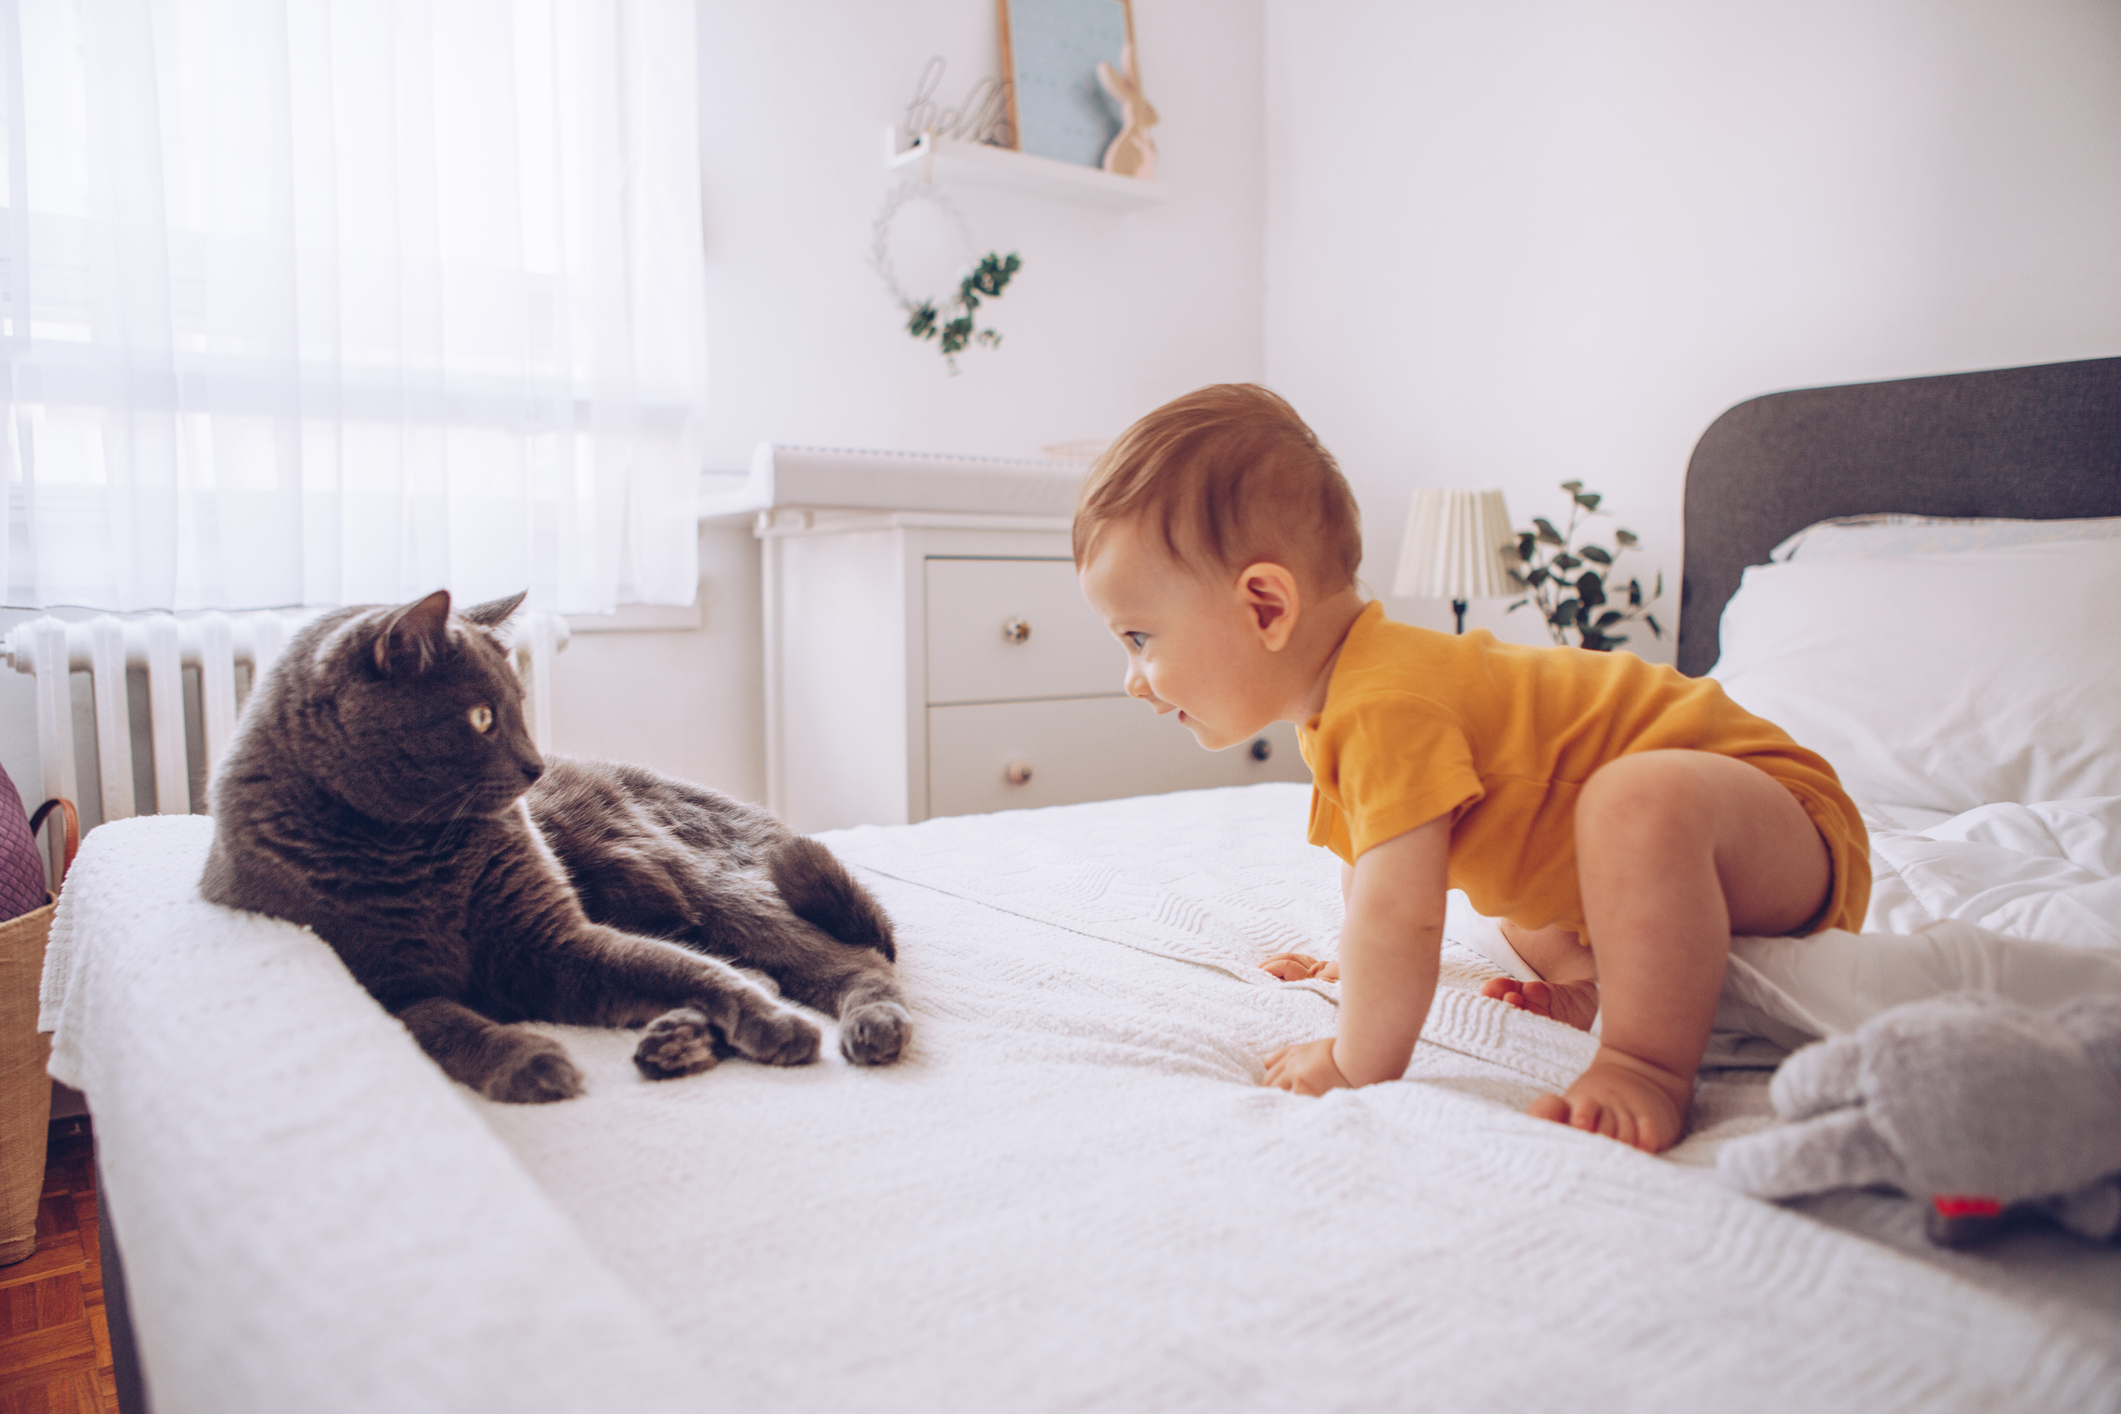 A baby crawling towards a cat on a bed